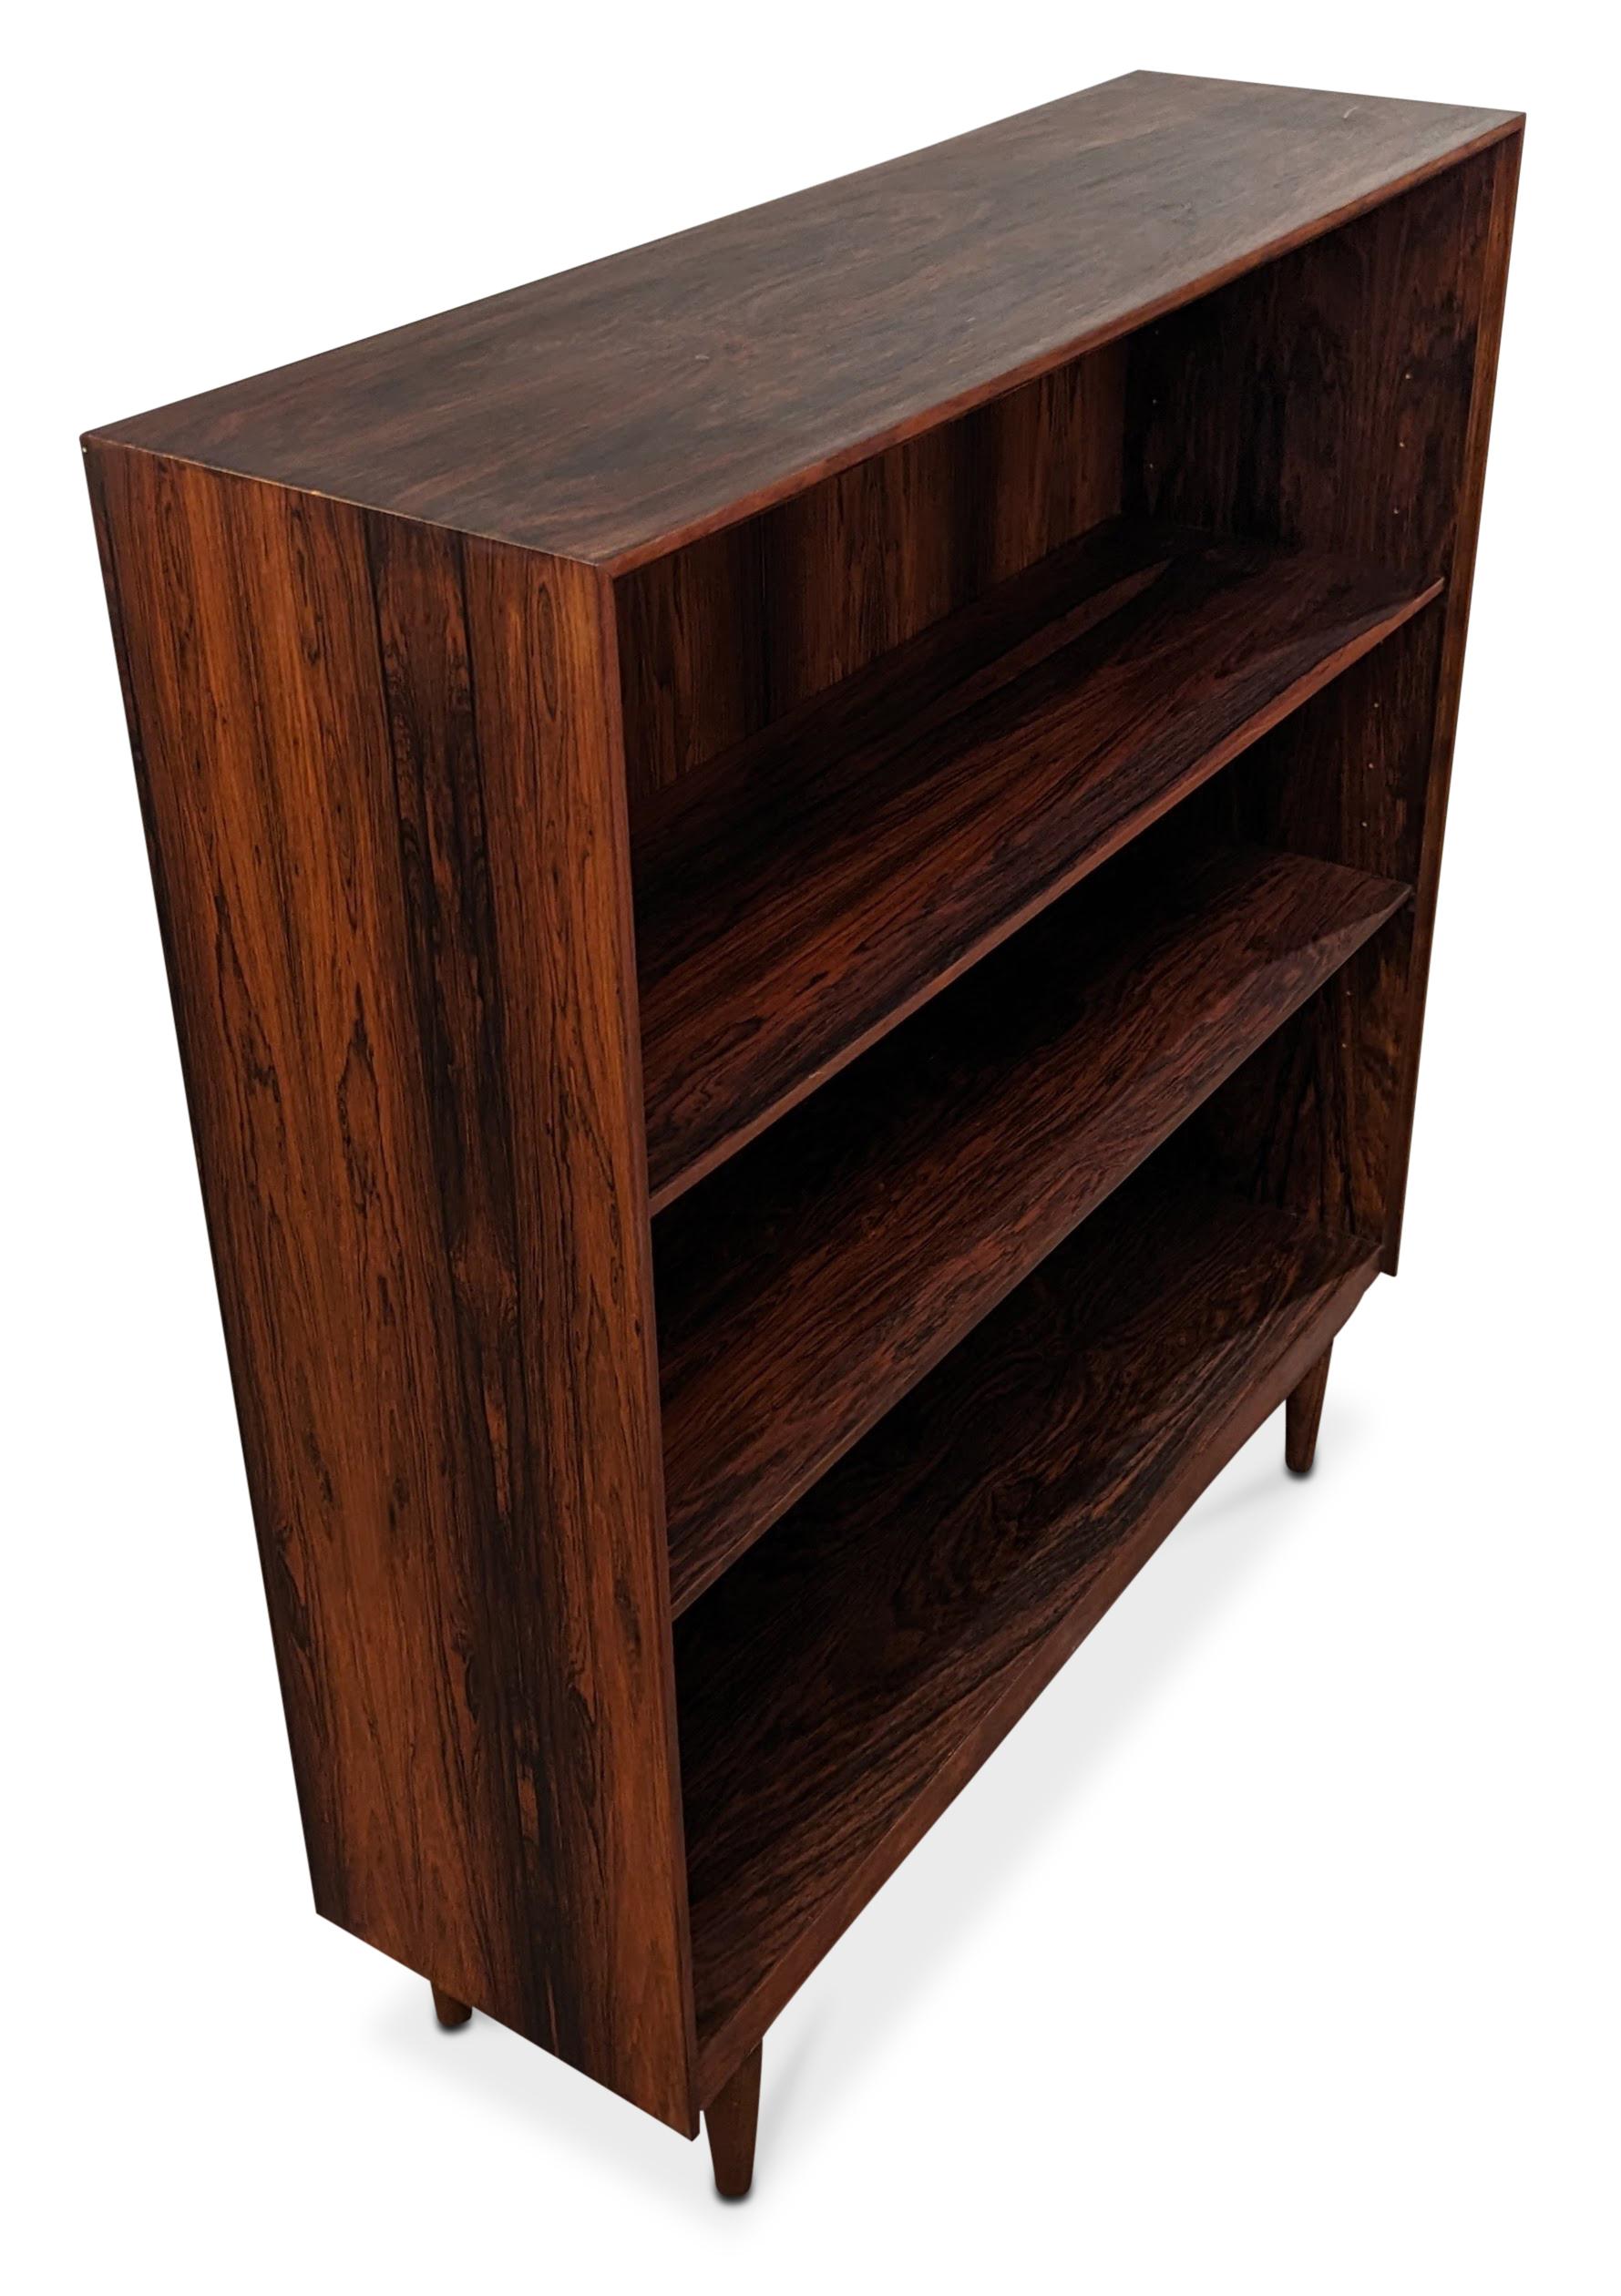 Vintage Danish Mid-Century Modern, made in the 1950s - Recently refurbished

Brazilian rosewood have been illegal to harvest since 1961 and on the U.N. CITES list of endangered spices since 1992. For each piece of rosewood furniture we import to